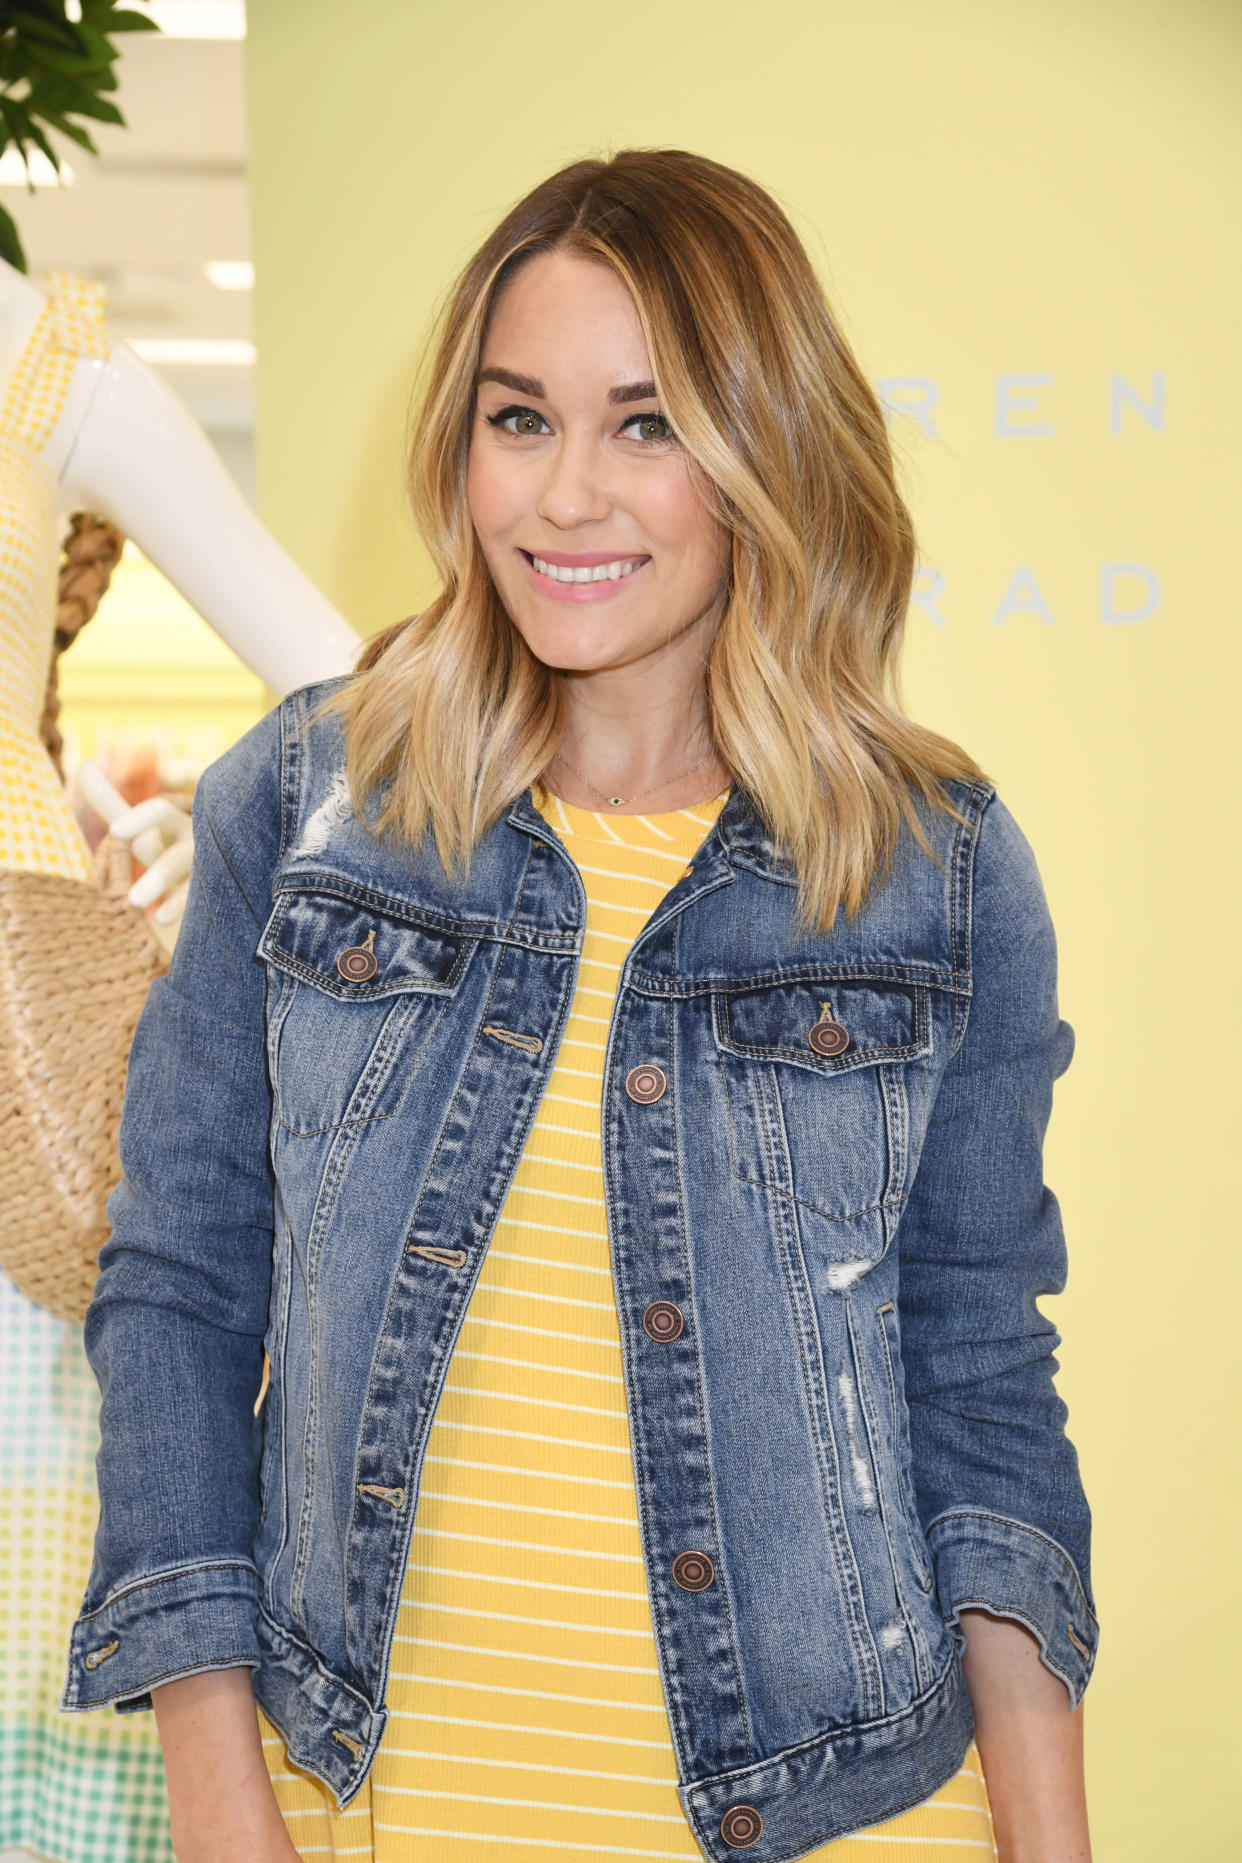 Lauren Conrad debuts Kohl's LC Lauren Conrad Spring Collection on April 11, 2019, in New York City. (Photo: Jennifer Graylock/Getty Images for Kohls)